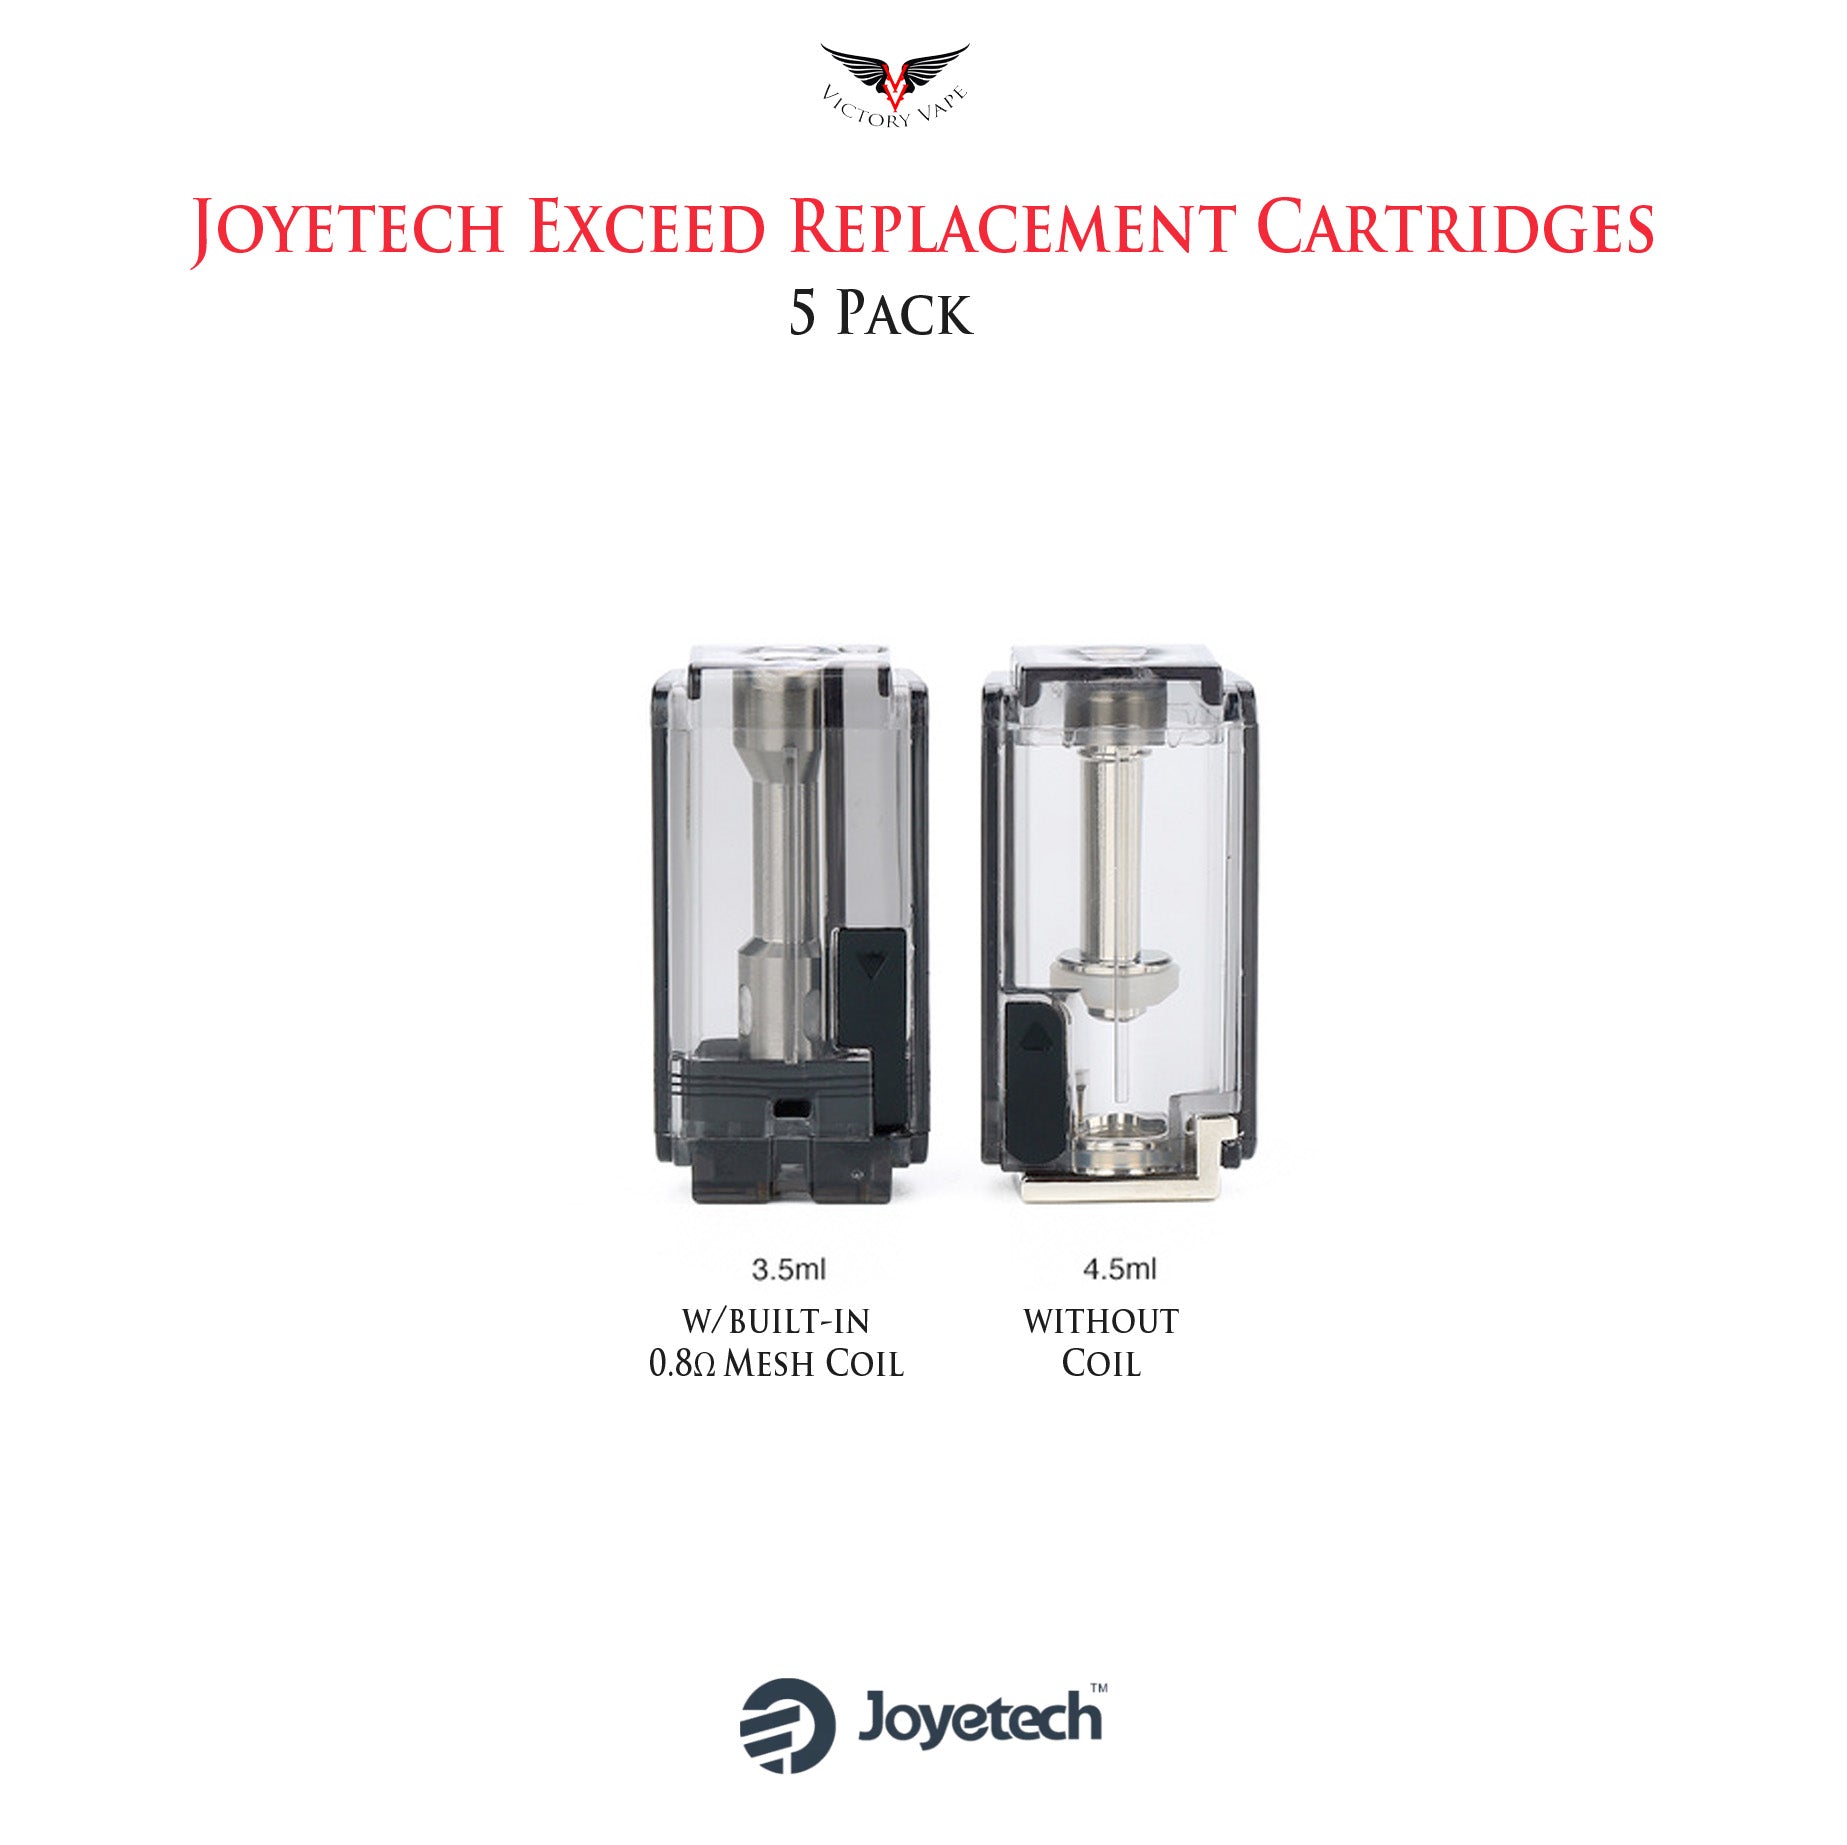  Joyetech Exceed Grip Pod Replacement Cartridges • 5 Pack 